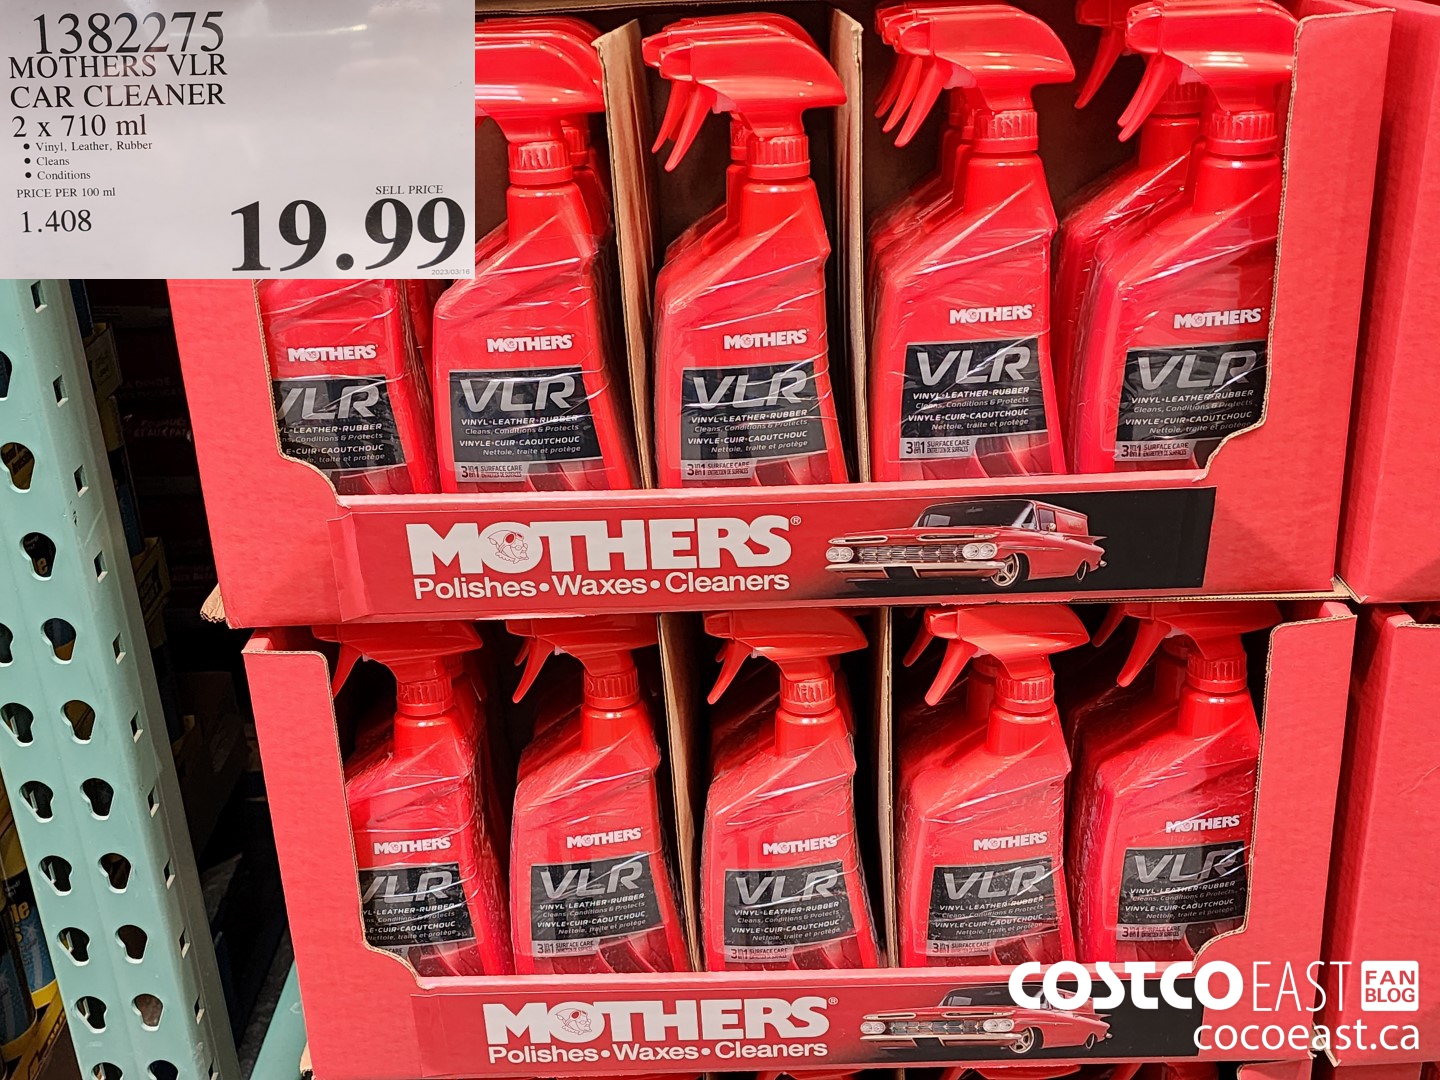 1382275 MOTHERS VLR CAR CLEANER 2 X 710 ML 3 00 INSTANT SAVINGS